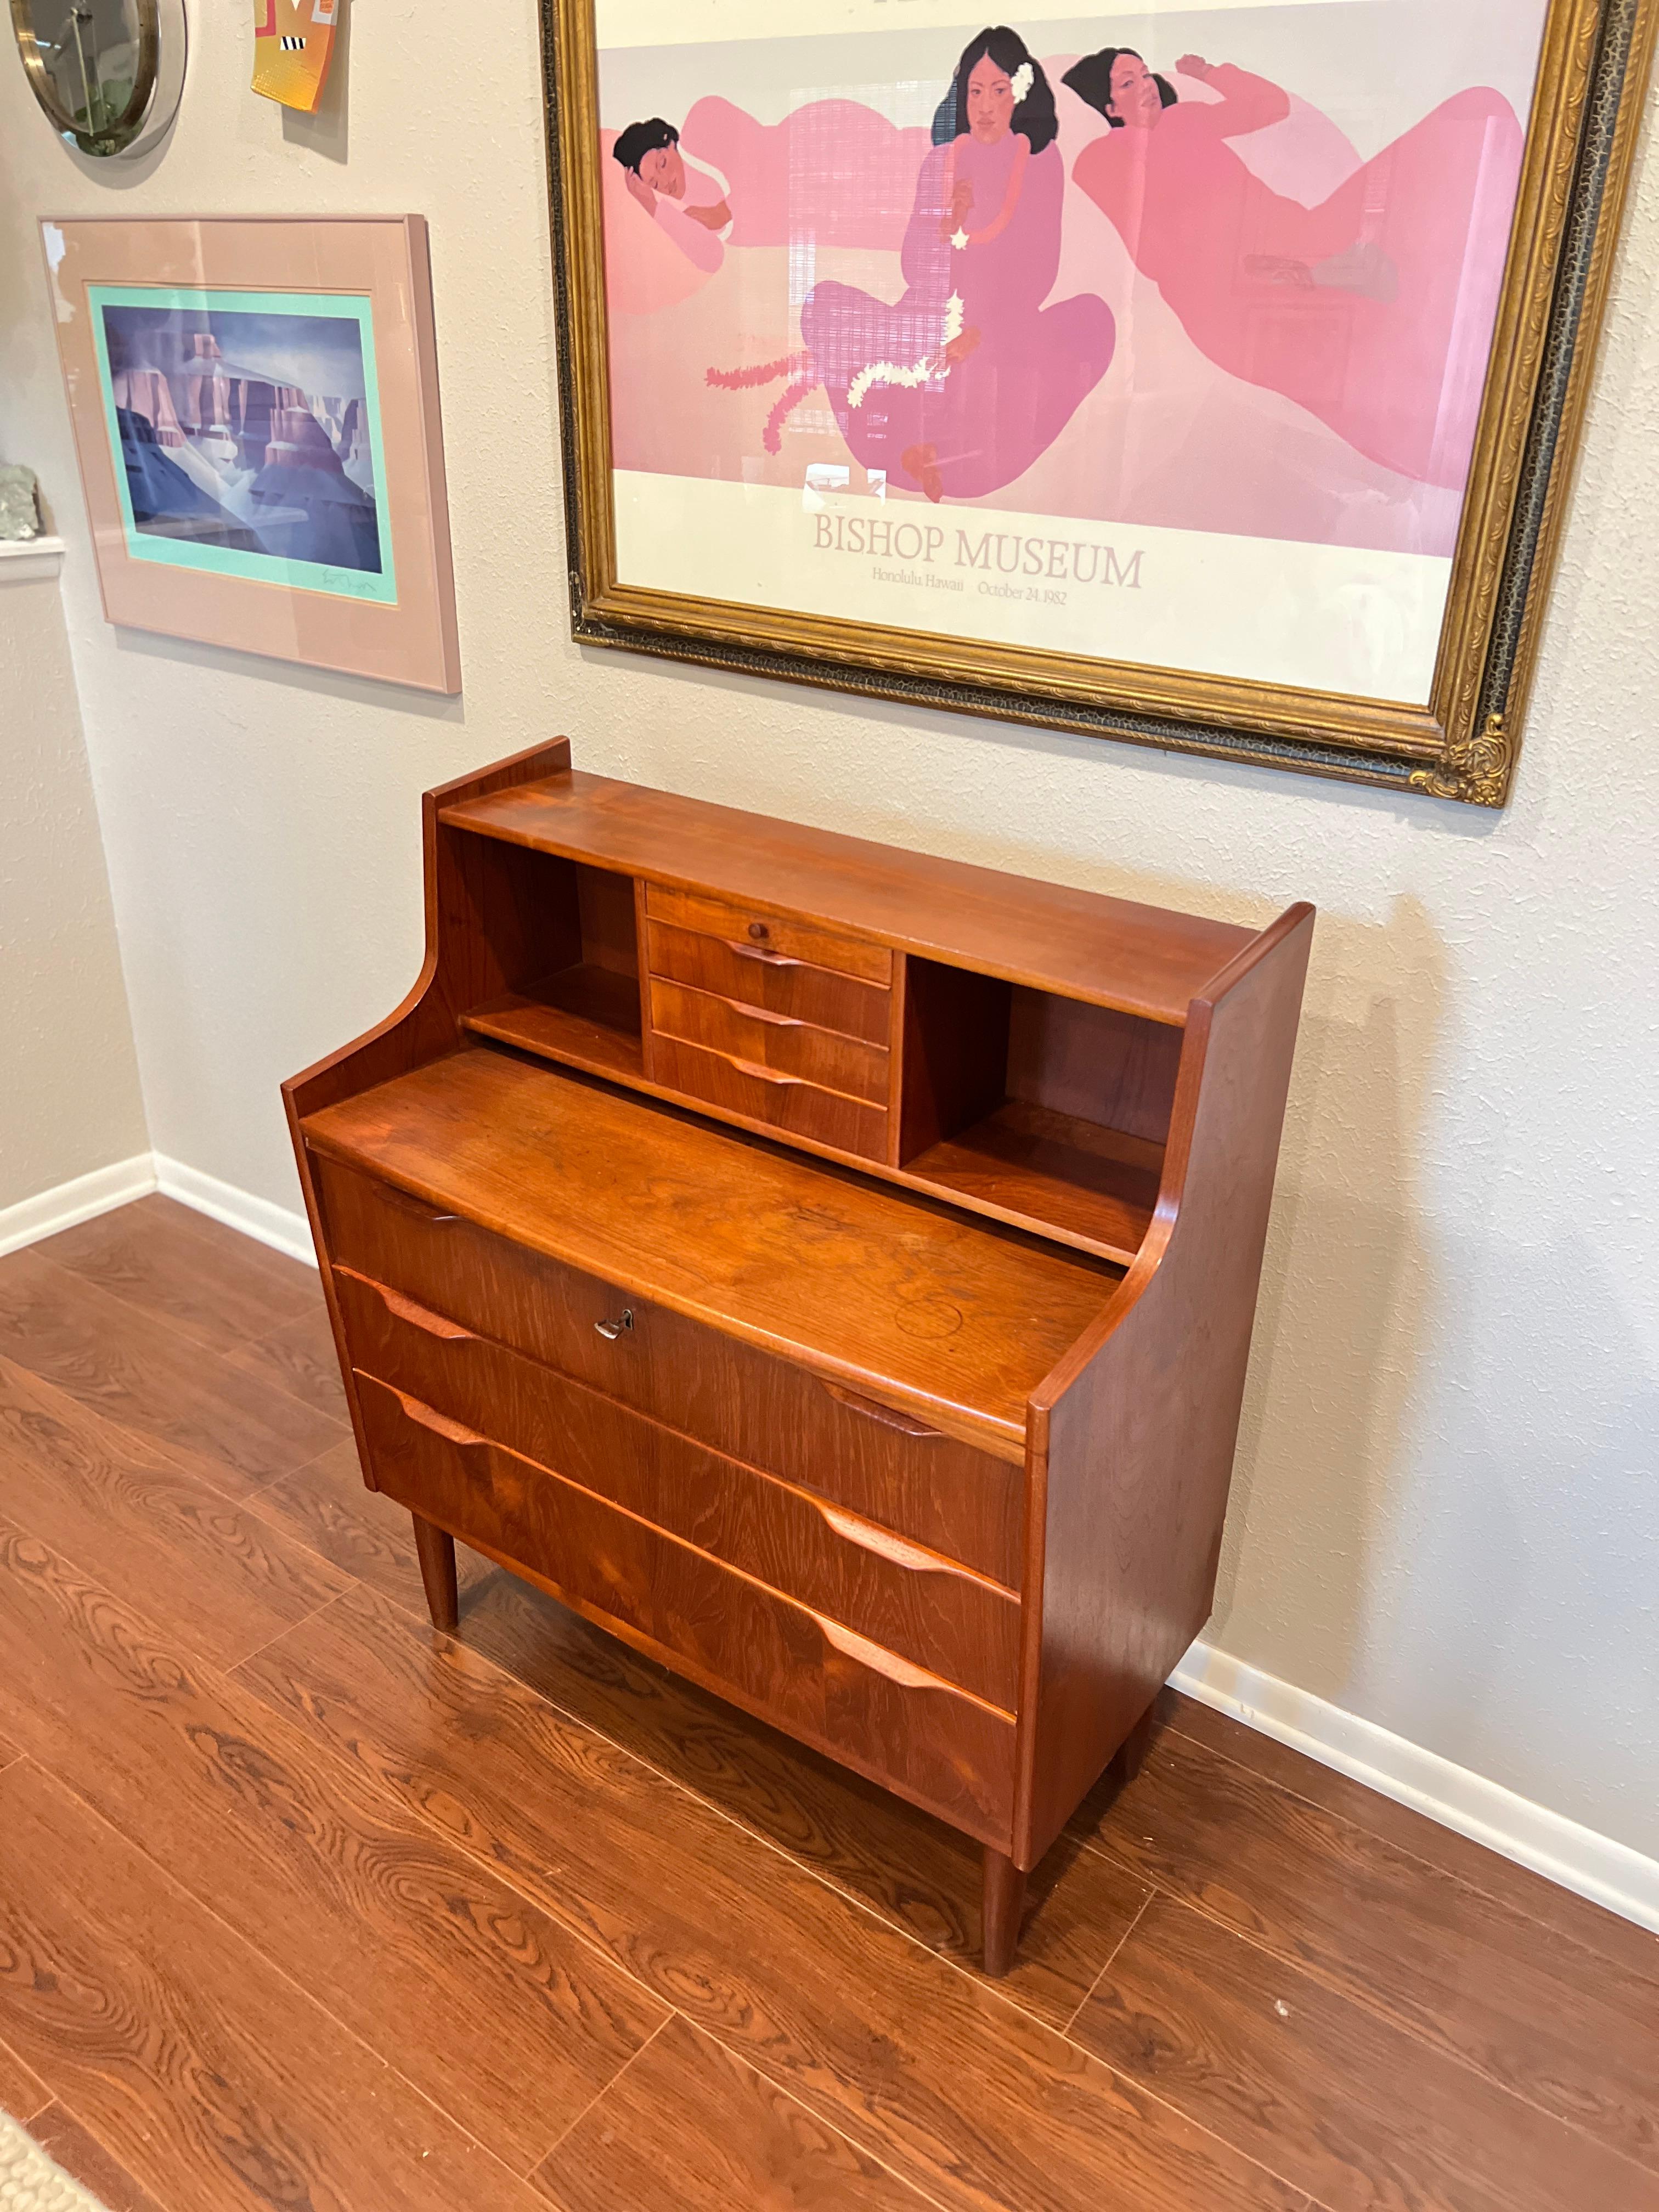 Danish style midcentury secretary desk from the 1960s, made of teak veneer. Top section has one sliding tray above 3 stacked drawers at center, flanked by two open storage niches. Also has a sliding leaf desk top and underneath are three bottom